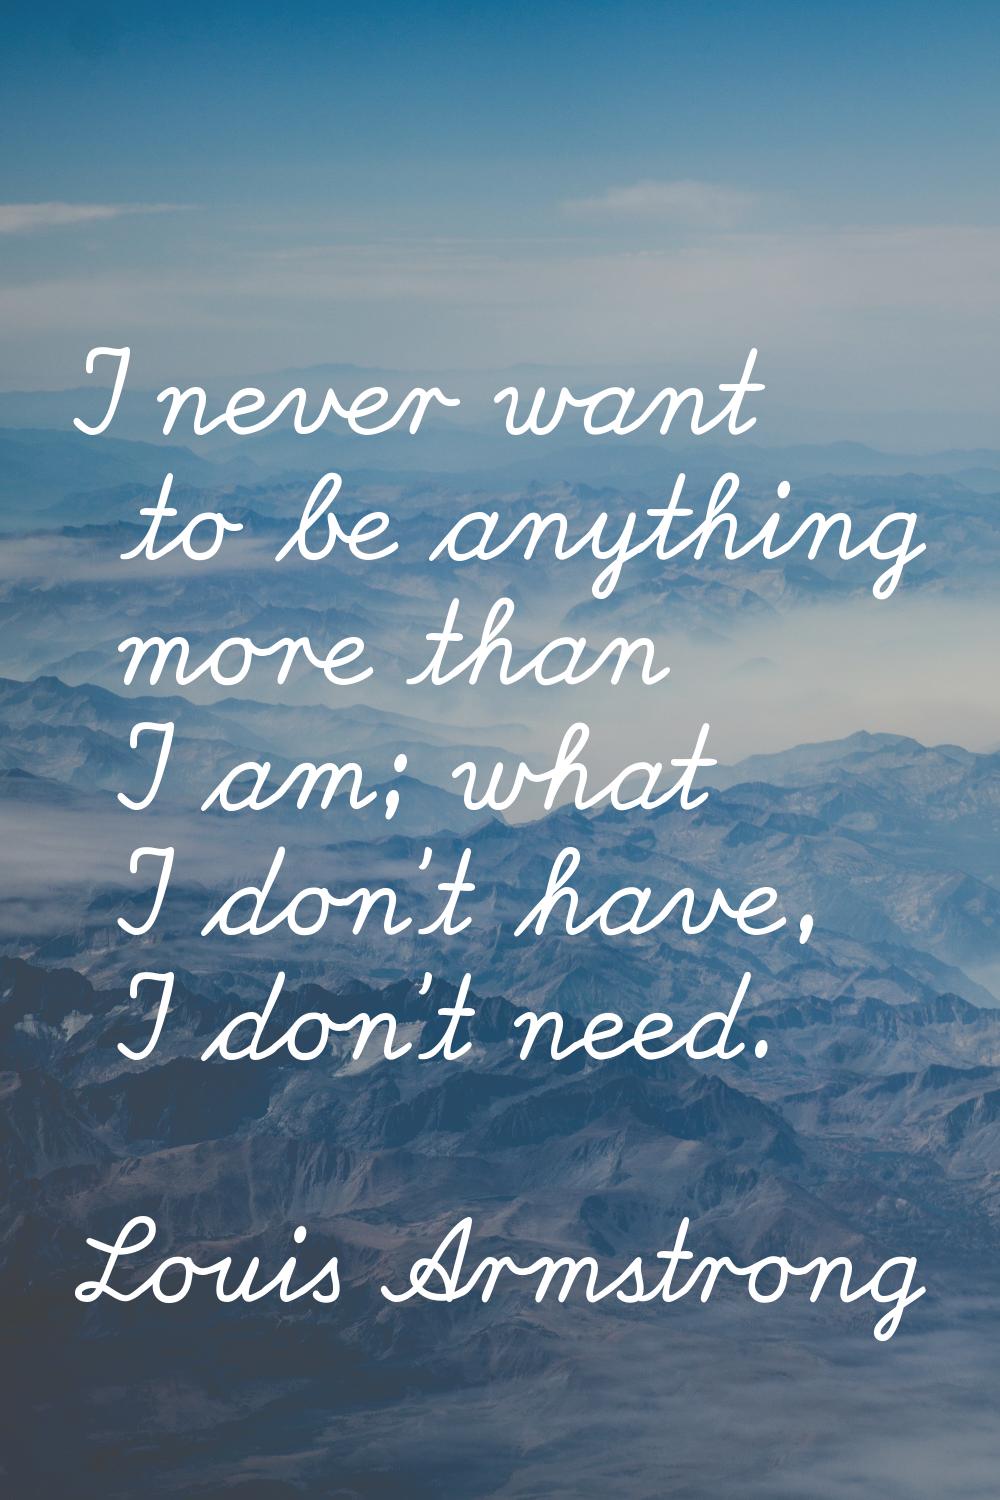 I never want to be anything more than I am; what I don't have, I don't need.